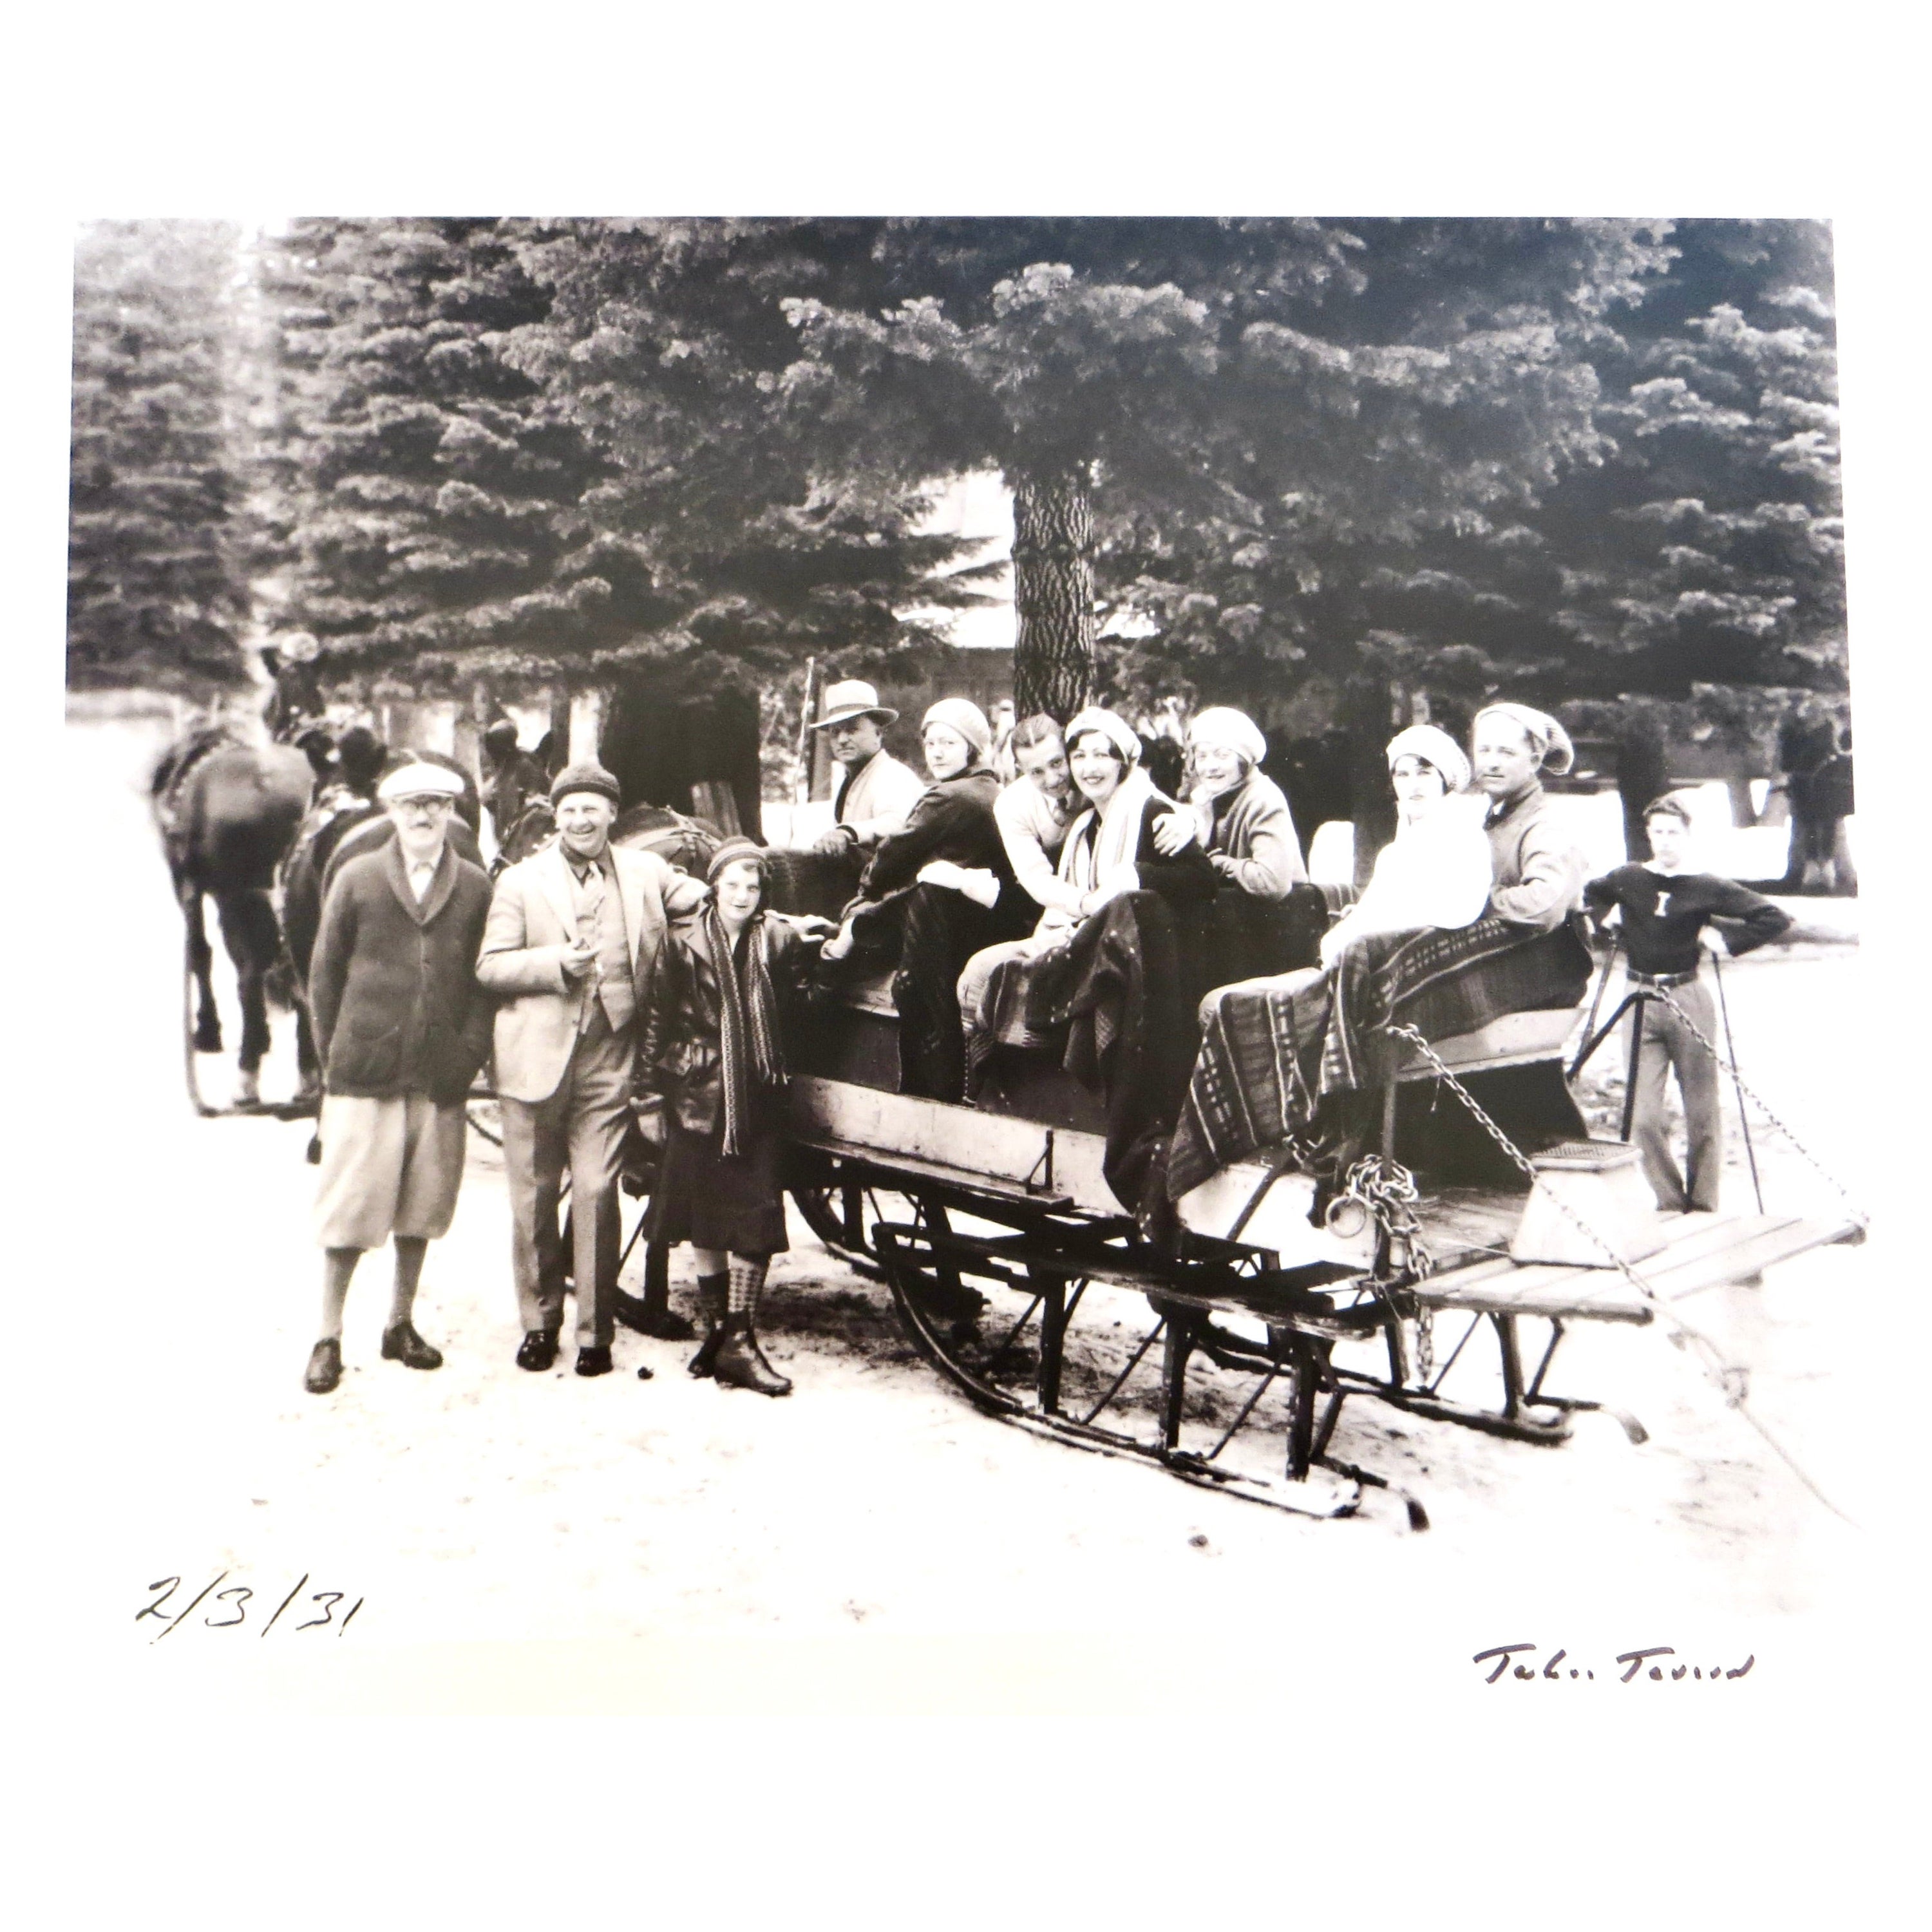 Original Vintage Photo; The Lake Tahoe Area "Group of People Sledding" Date 1931 For Sale